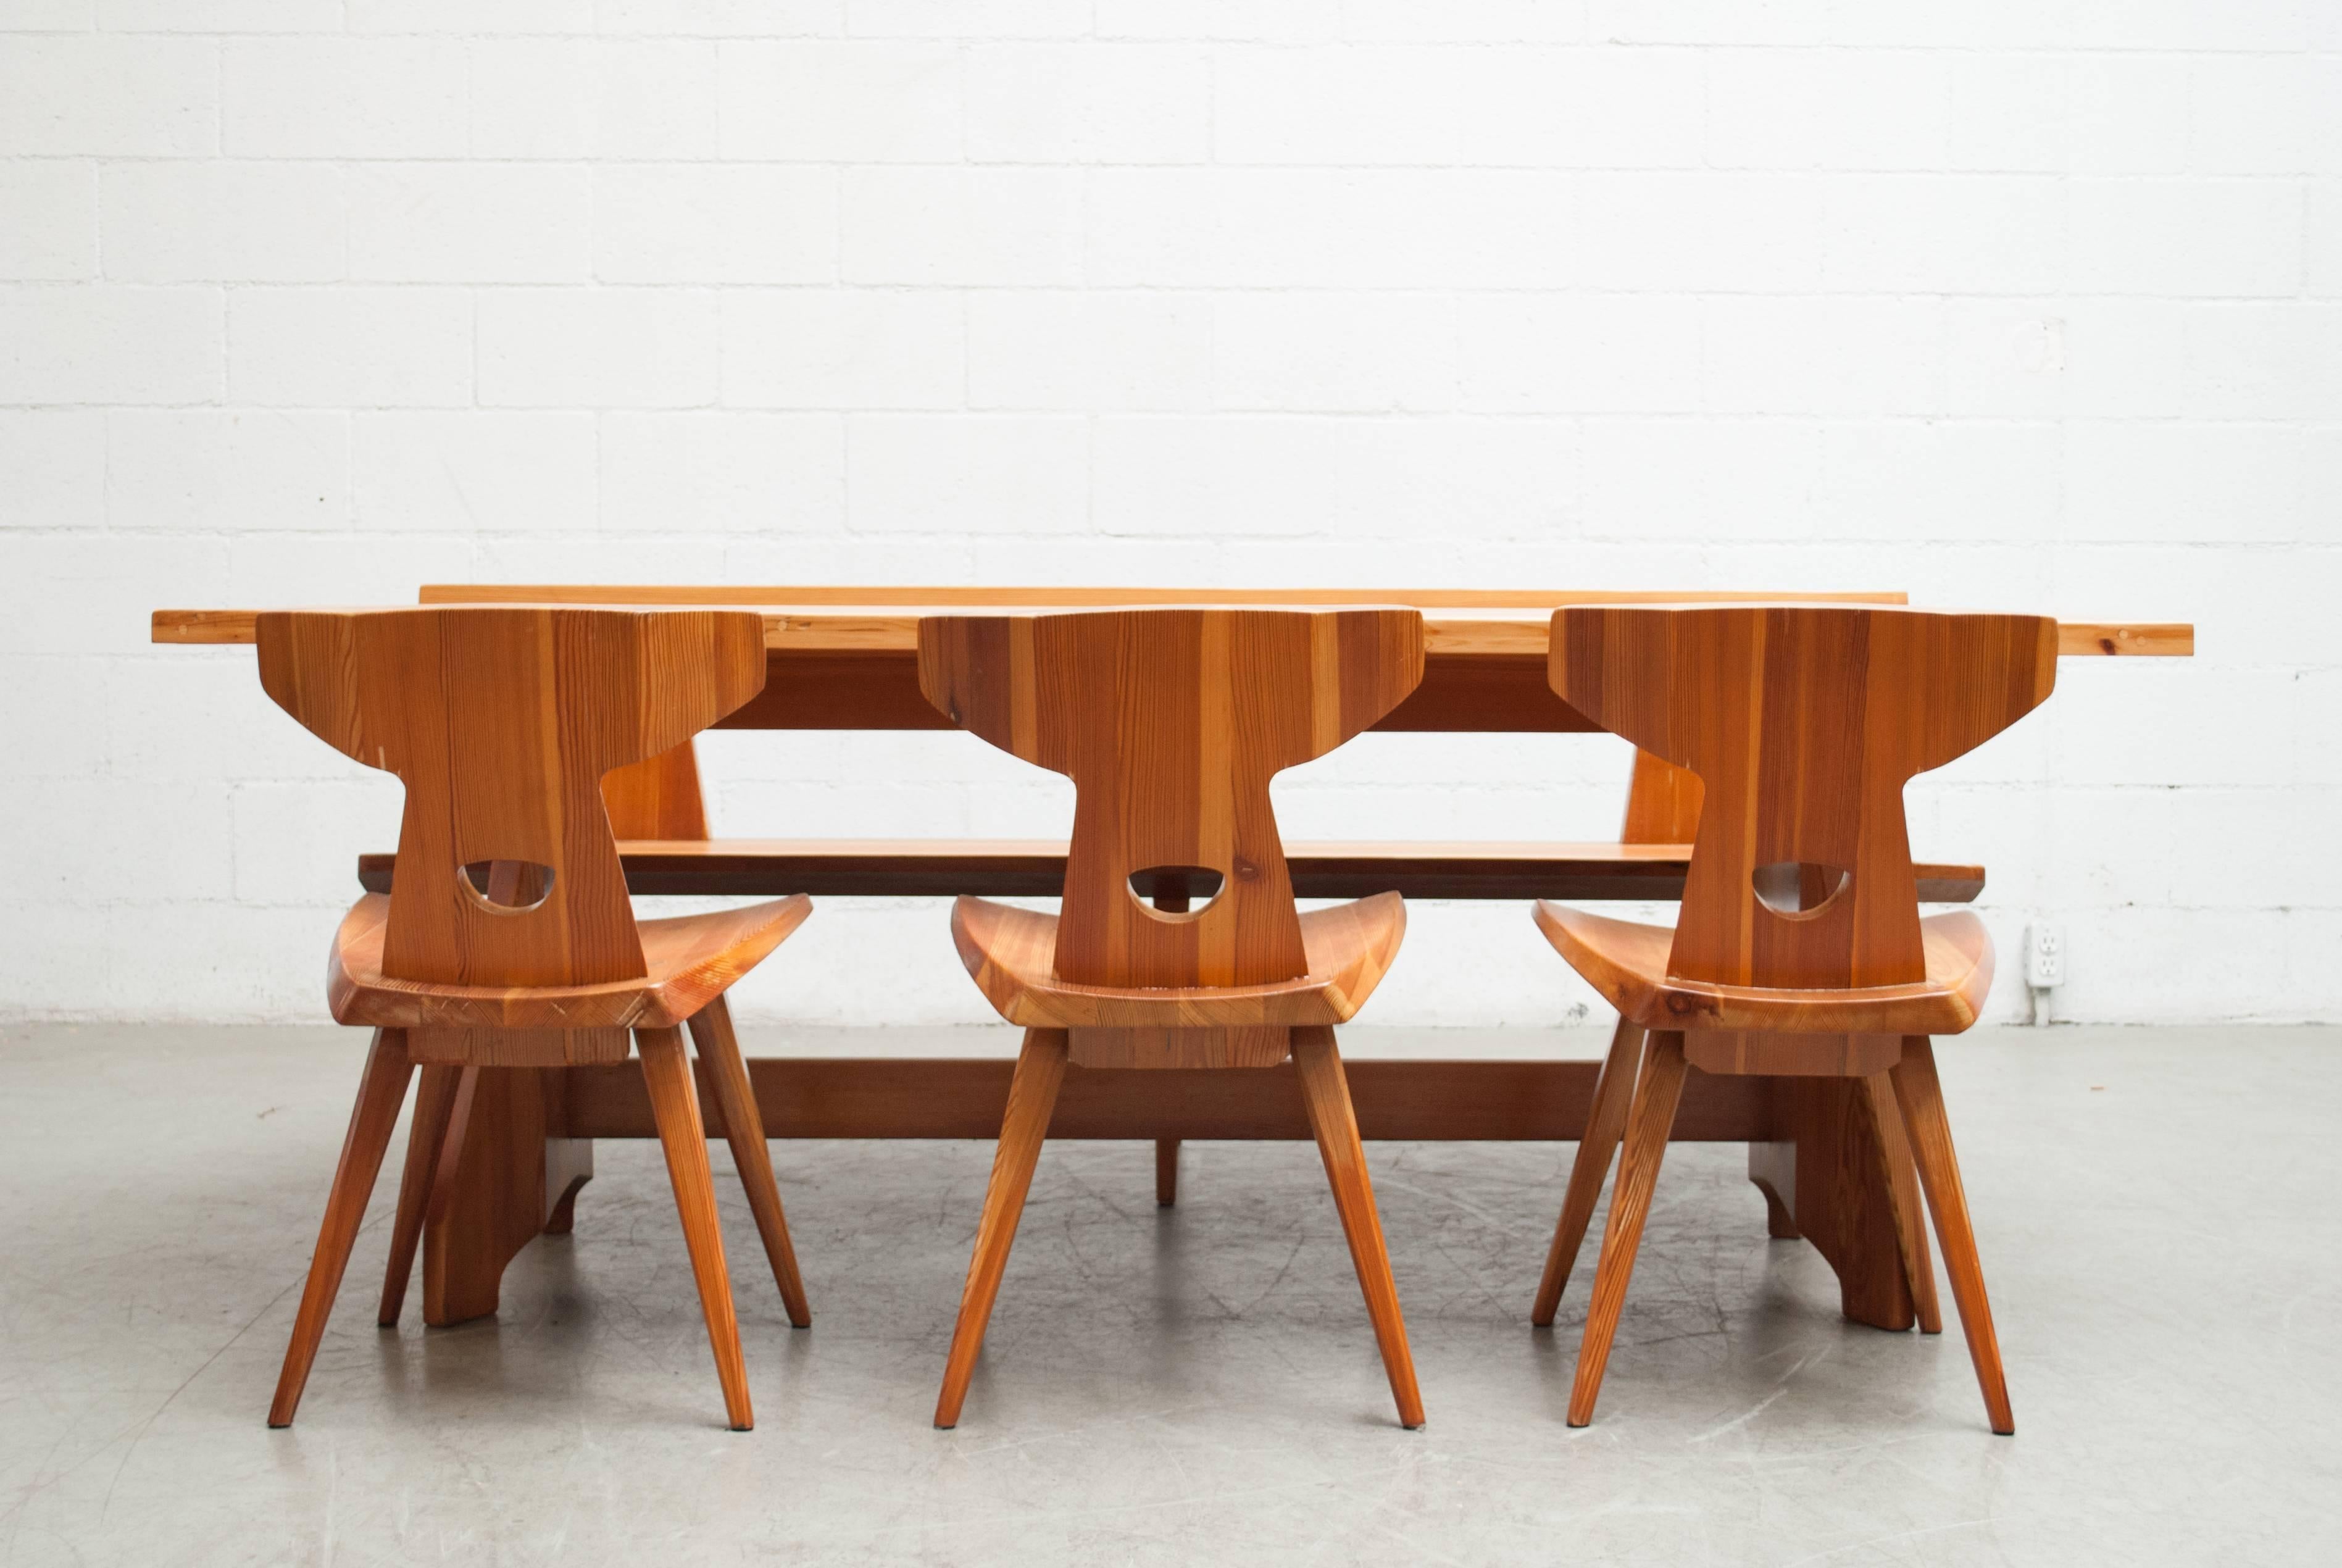 1960, amazing Danish solid pine dining set with long bench and three matching chairs. Kielland Brandt won the cabinet maker's guild prize that year. In good original condition with visible wear. Nice patina. Extra wide table most likely modified or